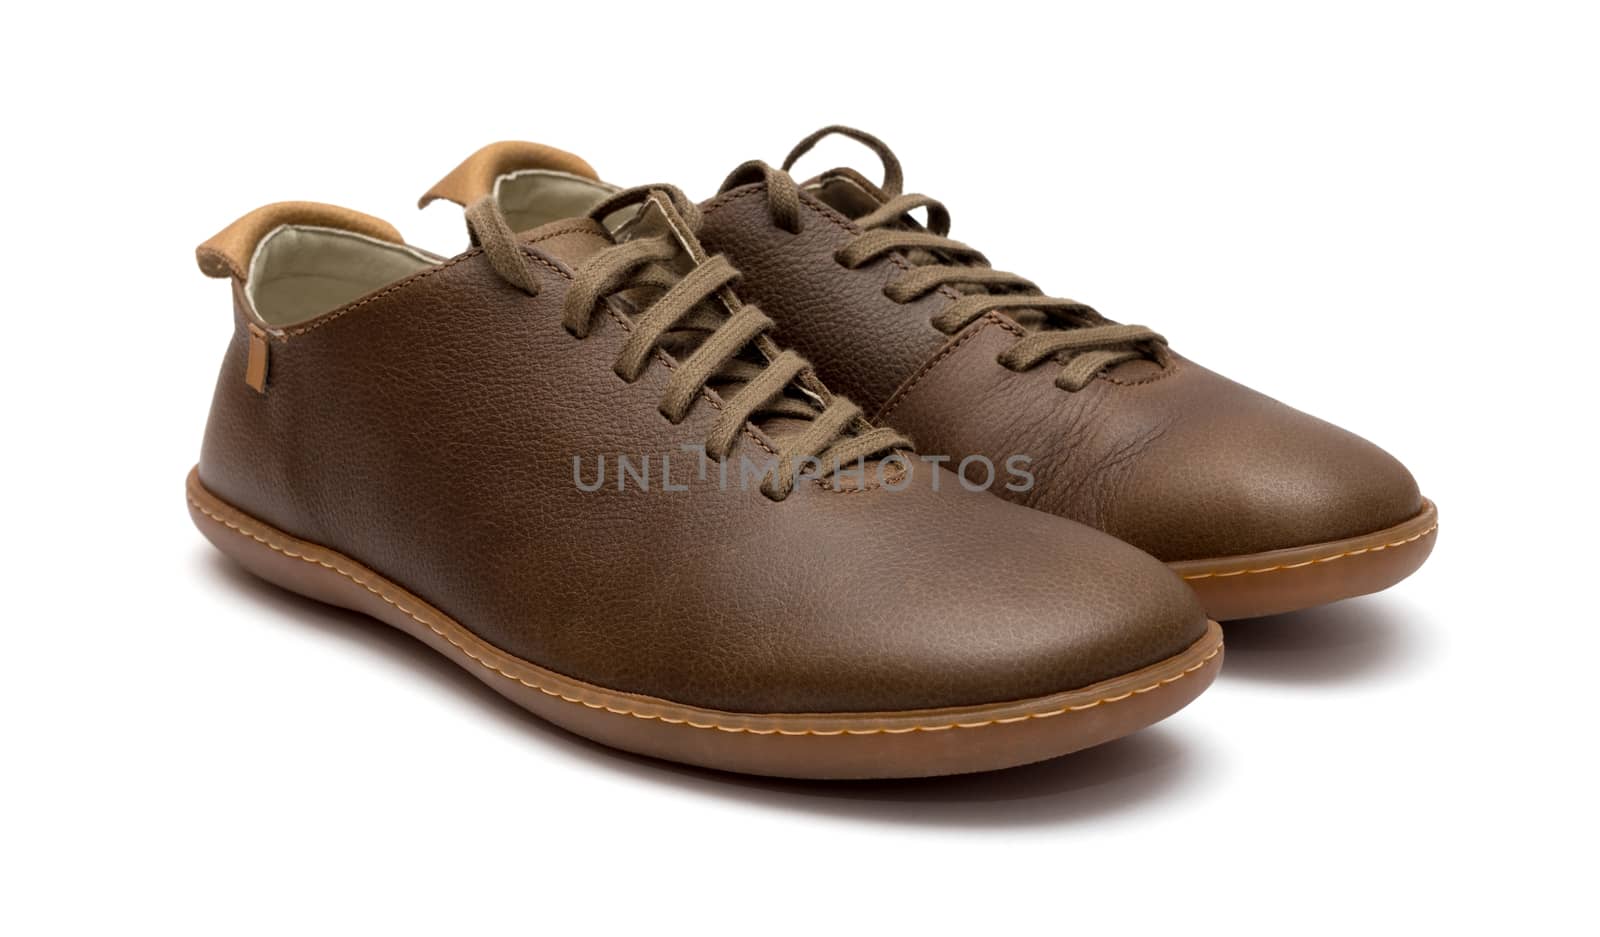 Brown Leather Men Shoes isolated on white background